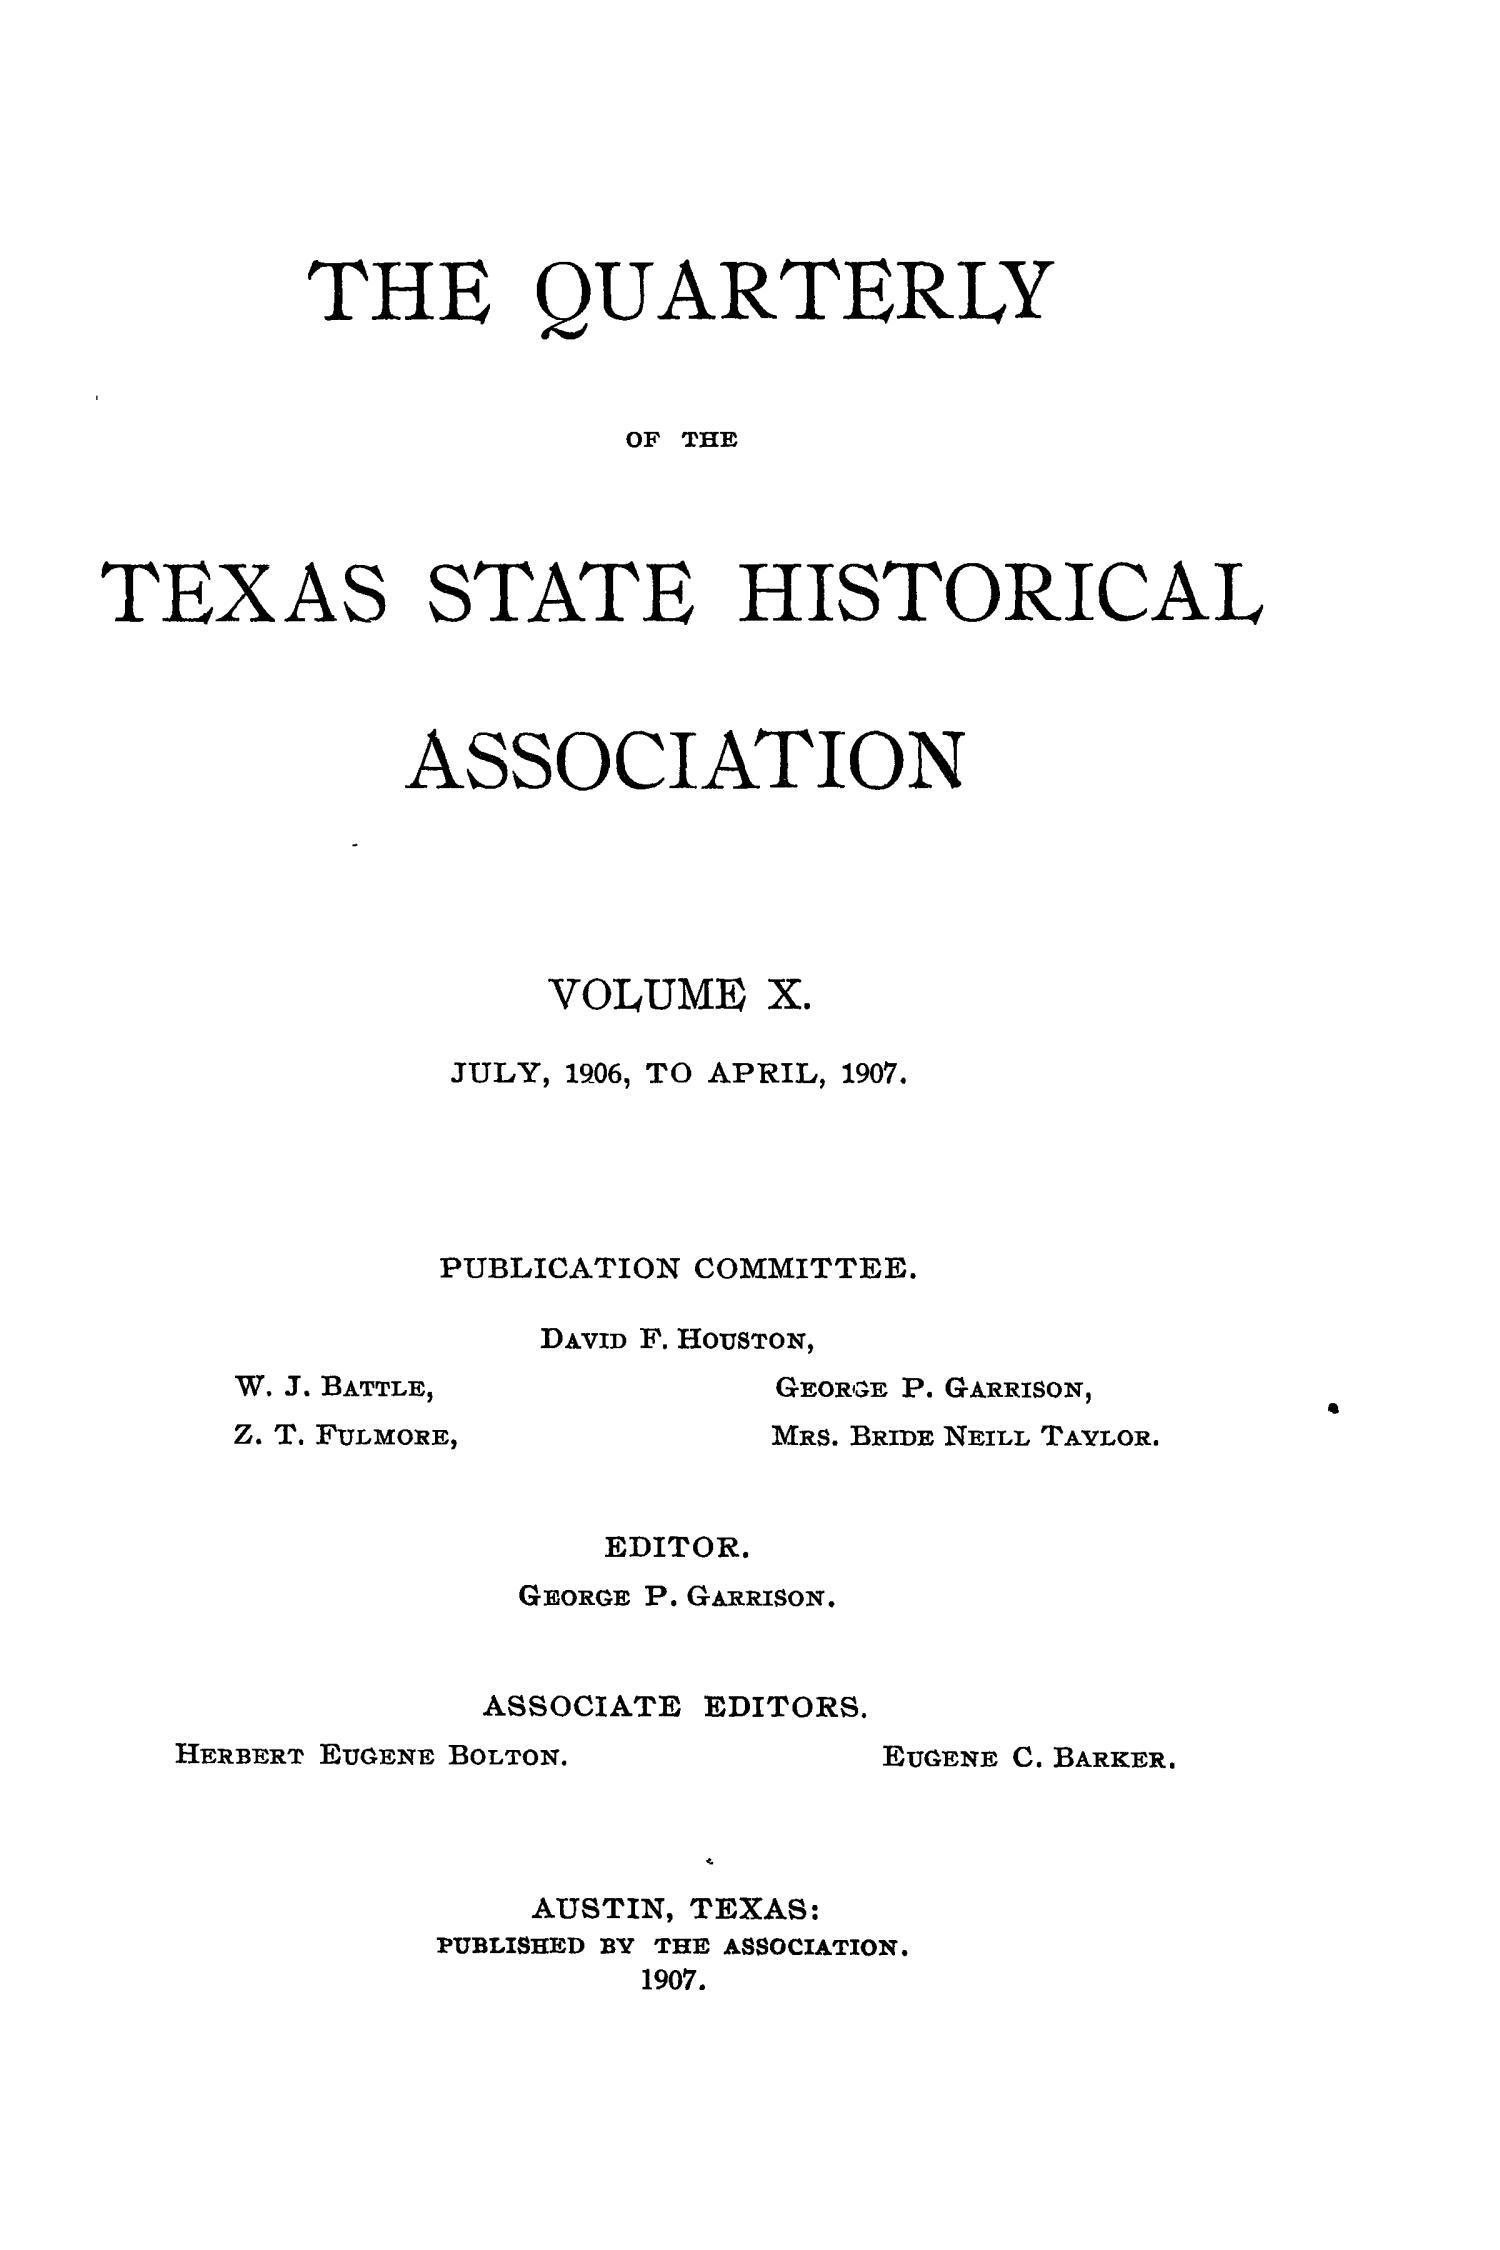 The Quarterly of the Texas State Historical Association, Volume 10, July 1906 - April, 1907
                                                
                                                    Front Cover
                                                